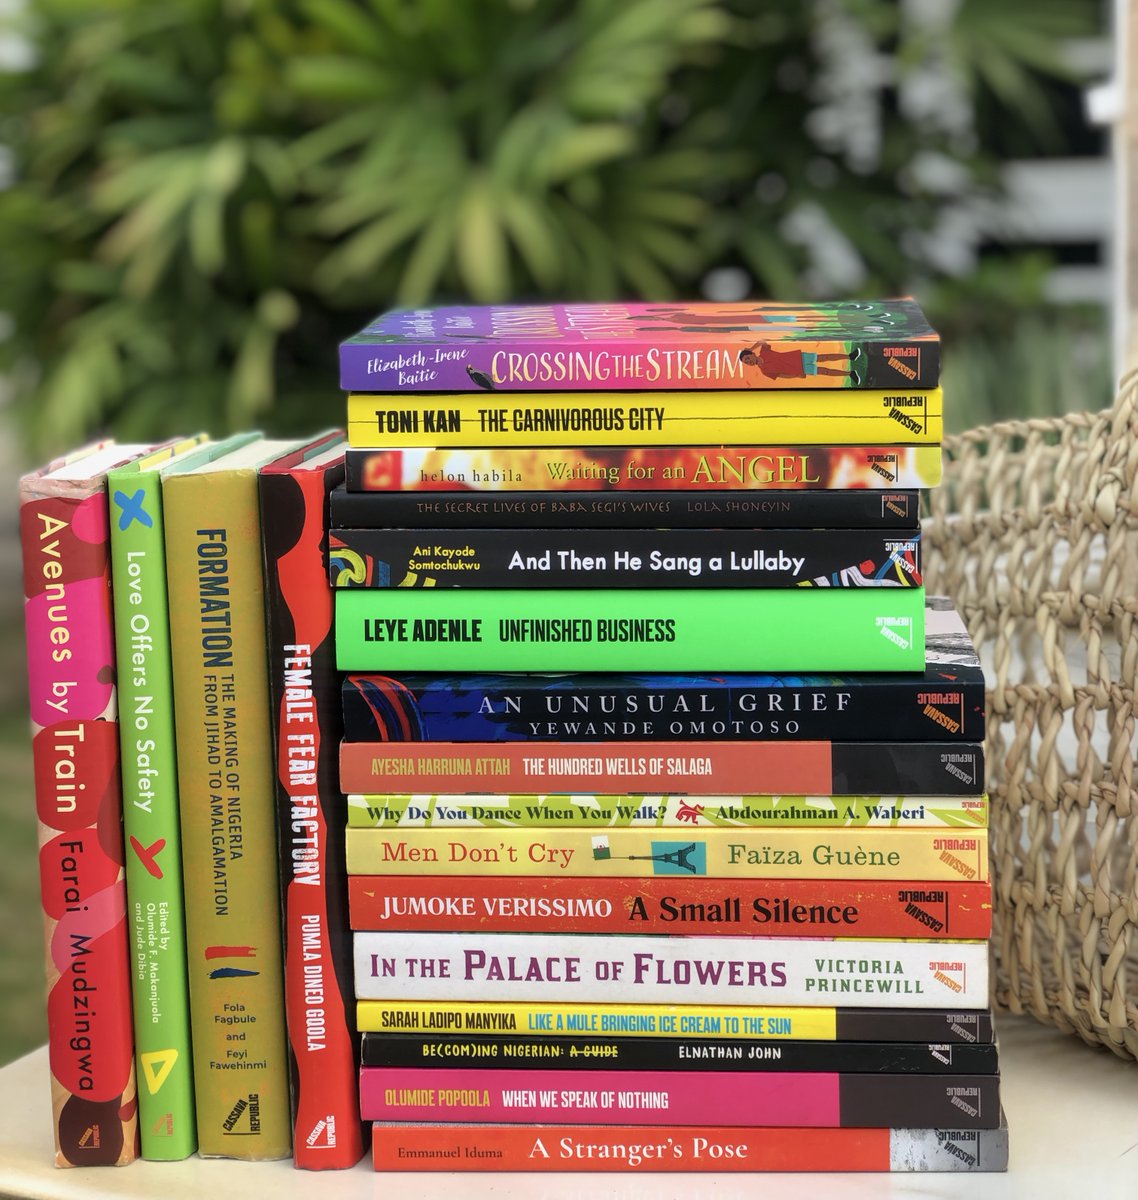 Wondering what to read this long weekend? Dip into our titles and experience some of the finest storytelling in contemporary literature from Africa and its diaspora. Or treat yourself to some #CassavaRepublic books. What’s on your reading list? cassavarepublic.biz